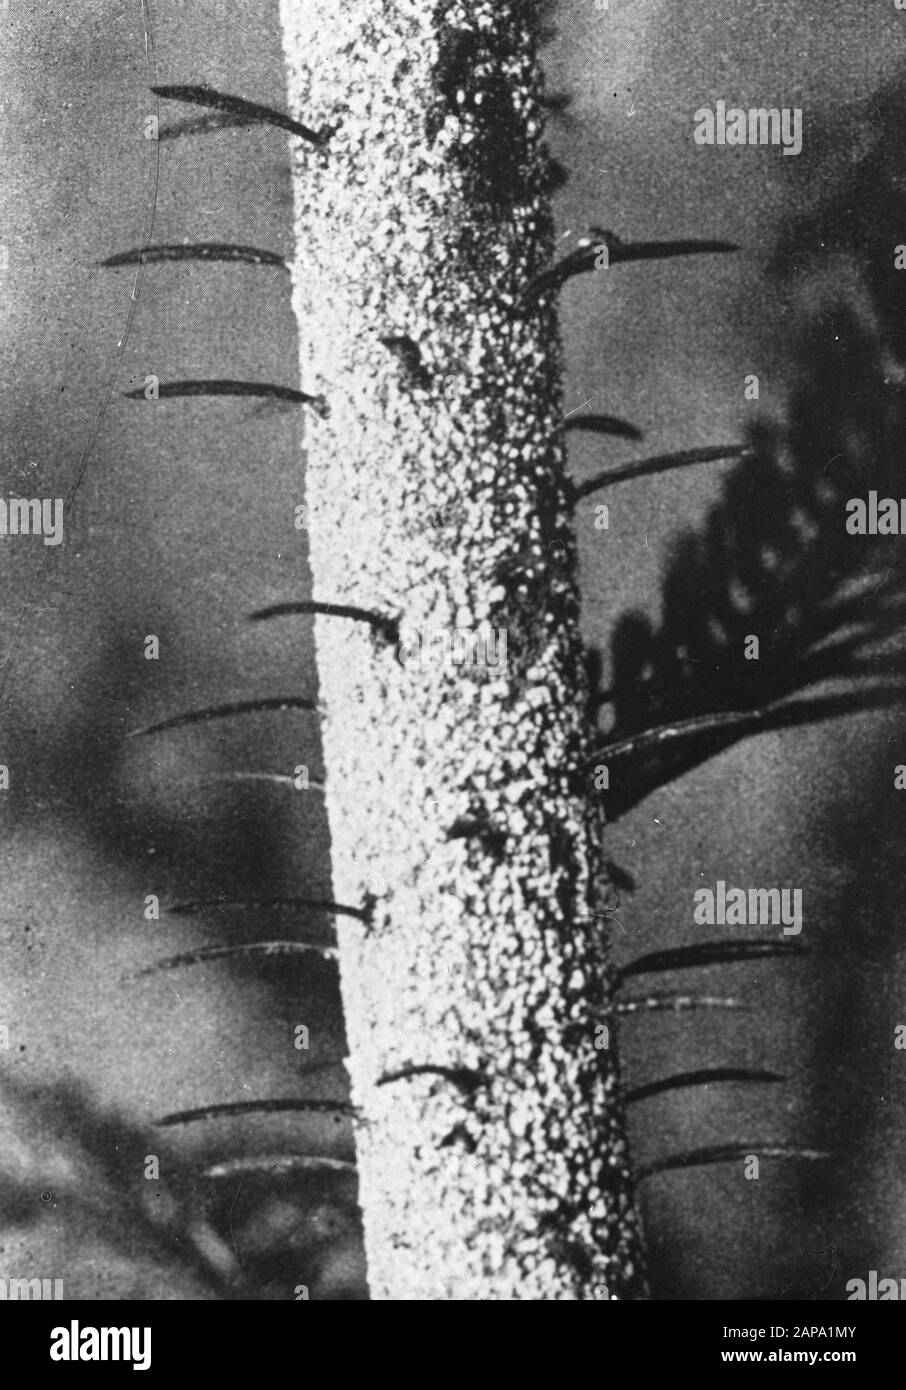 damaged Date: undated Keywords: higher planen, damage, fungi Personal name: dreyfussia piceae Stock Photo